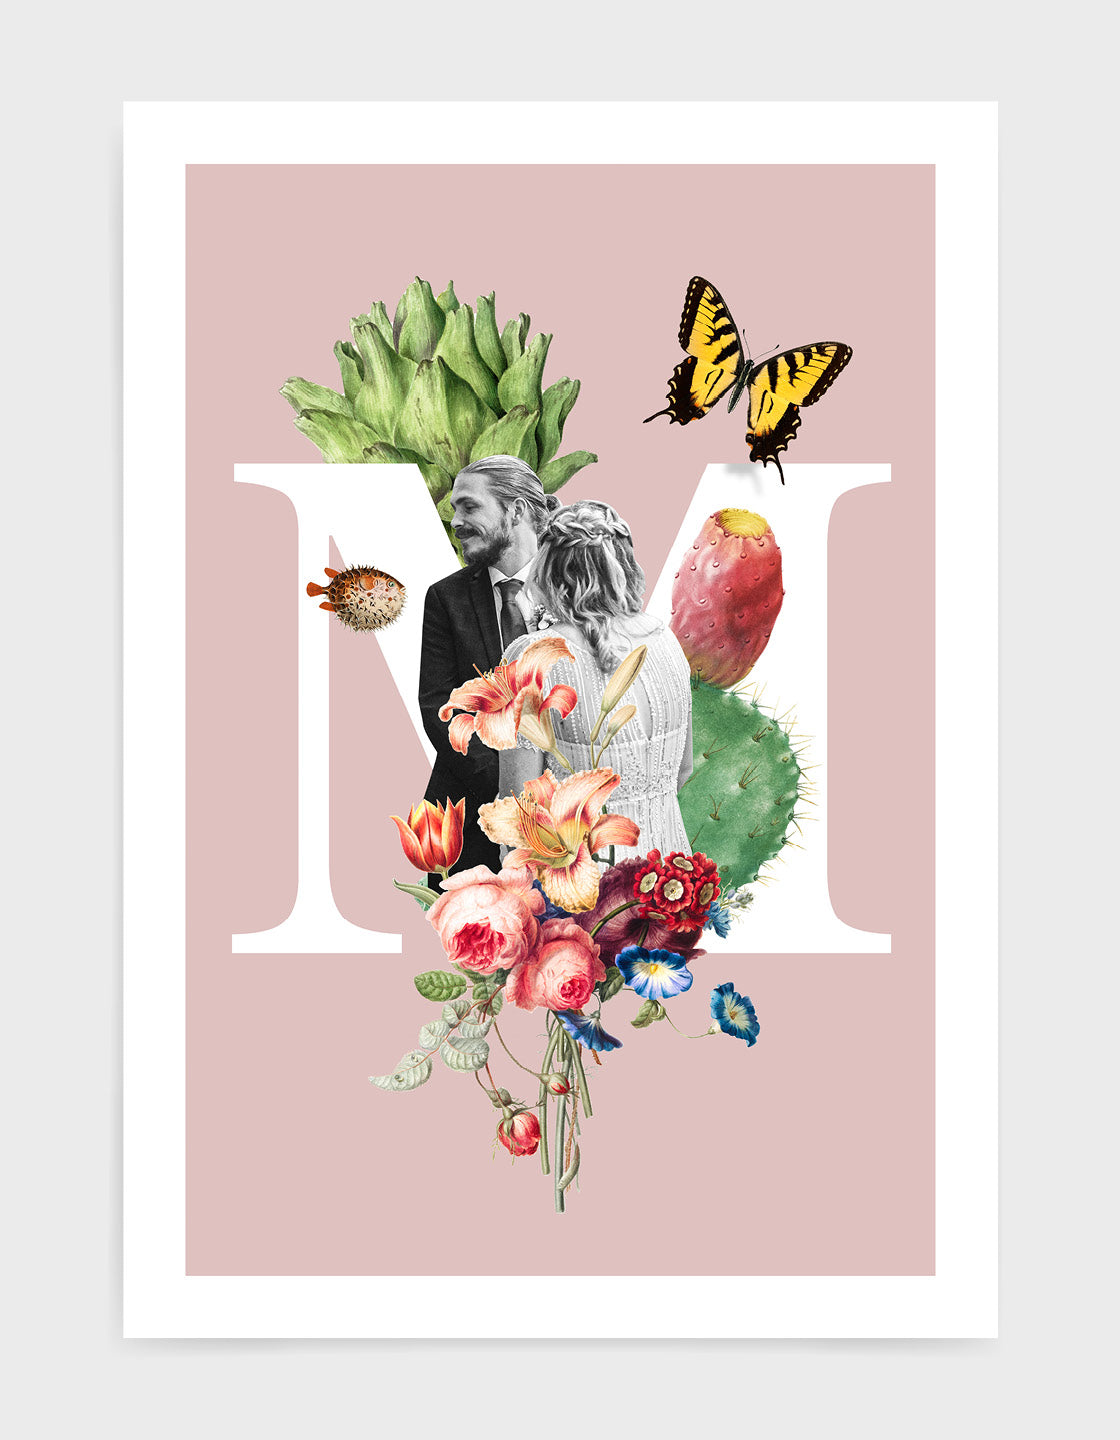 Initial print with custom photo and decorated with vintage illustrations including butterfly, flora and fauna against a pink background